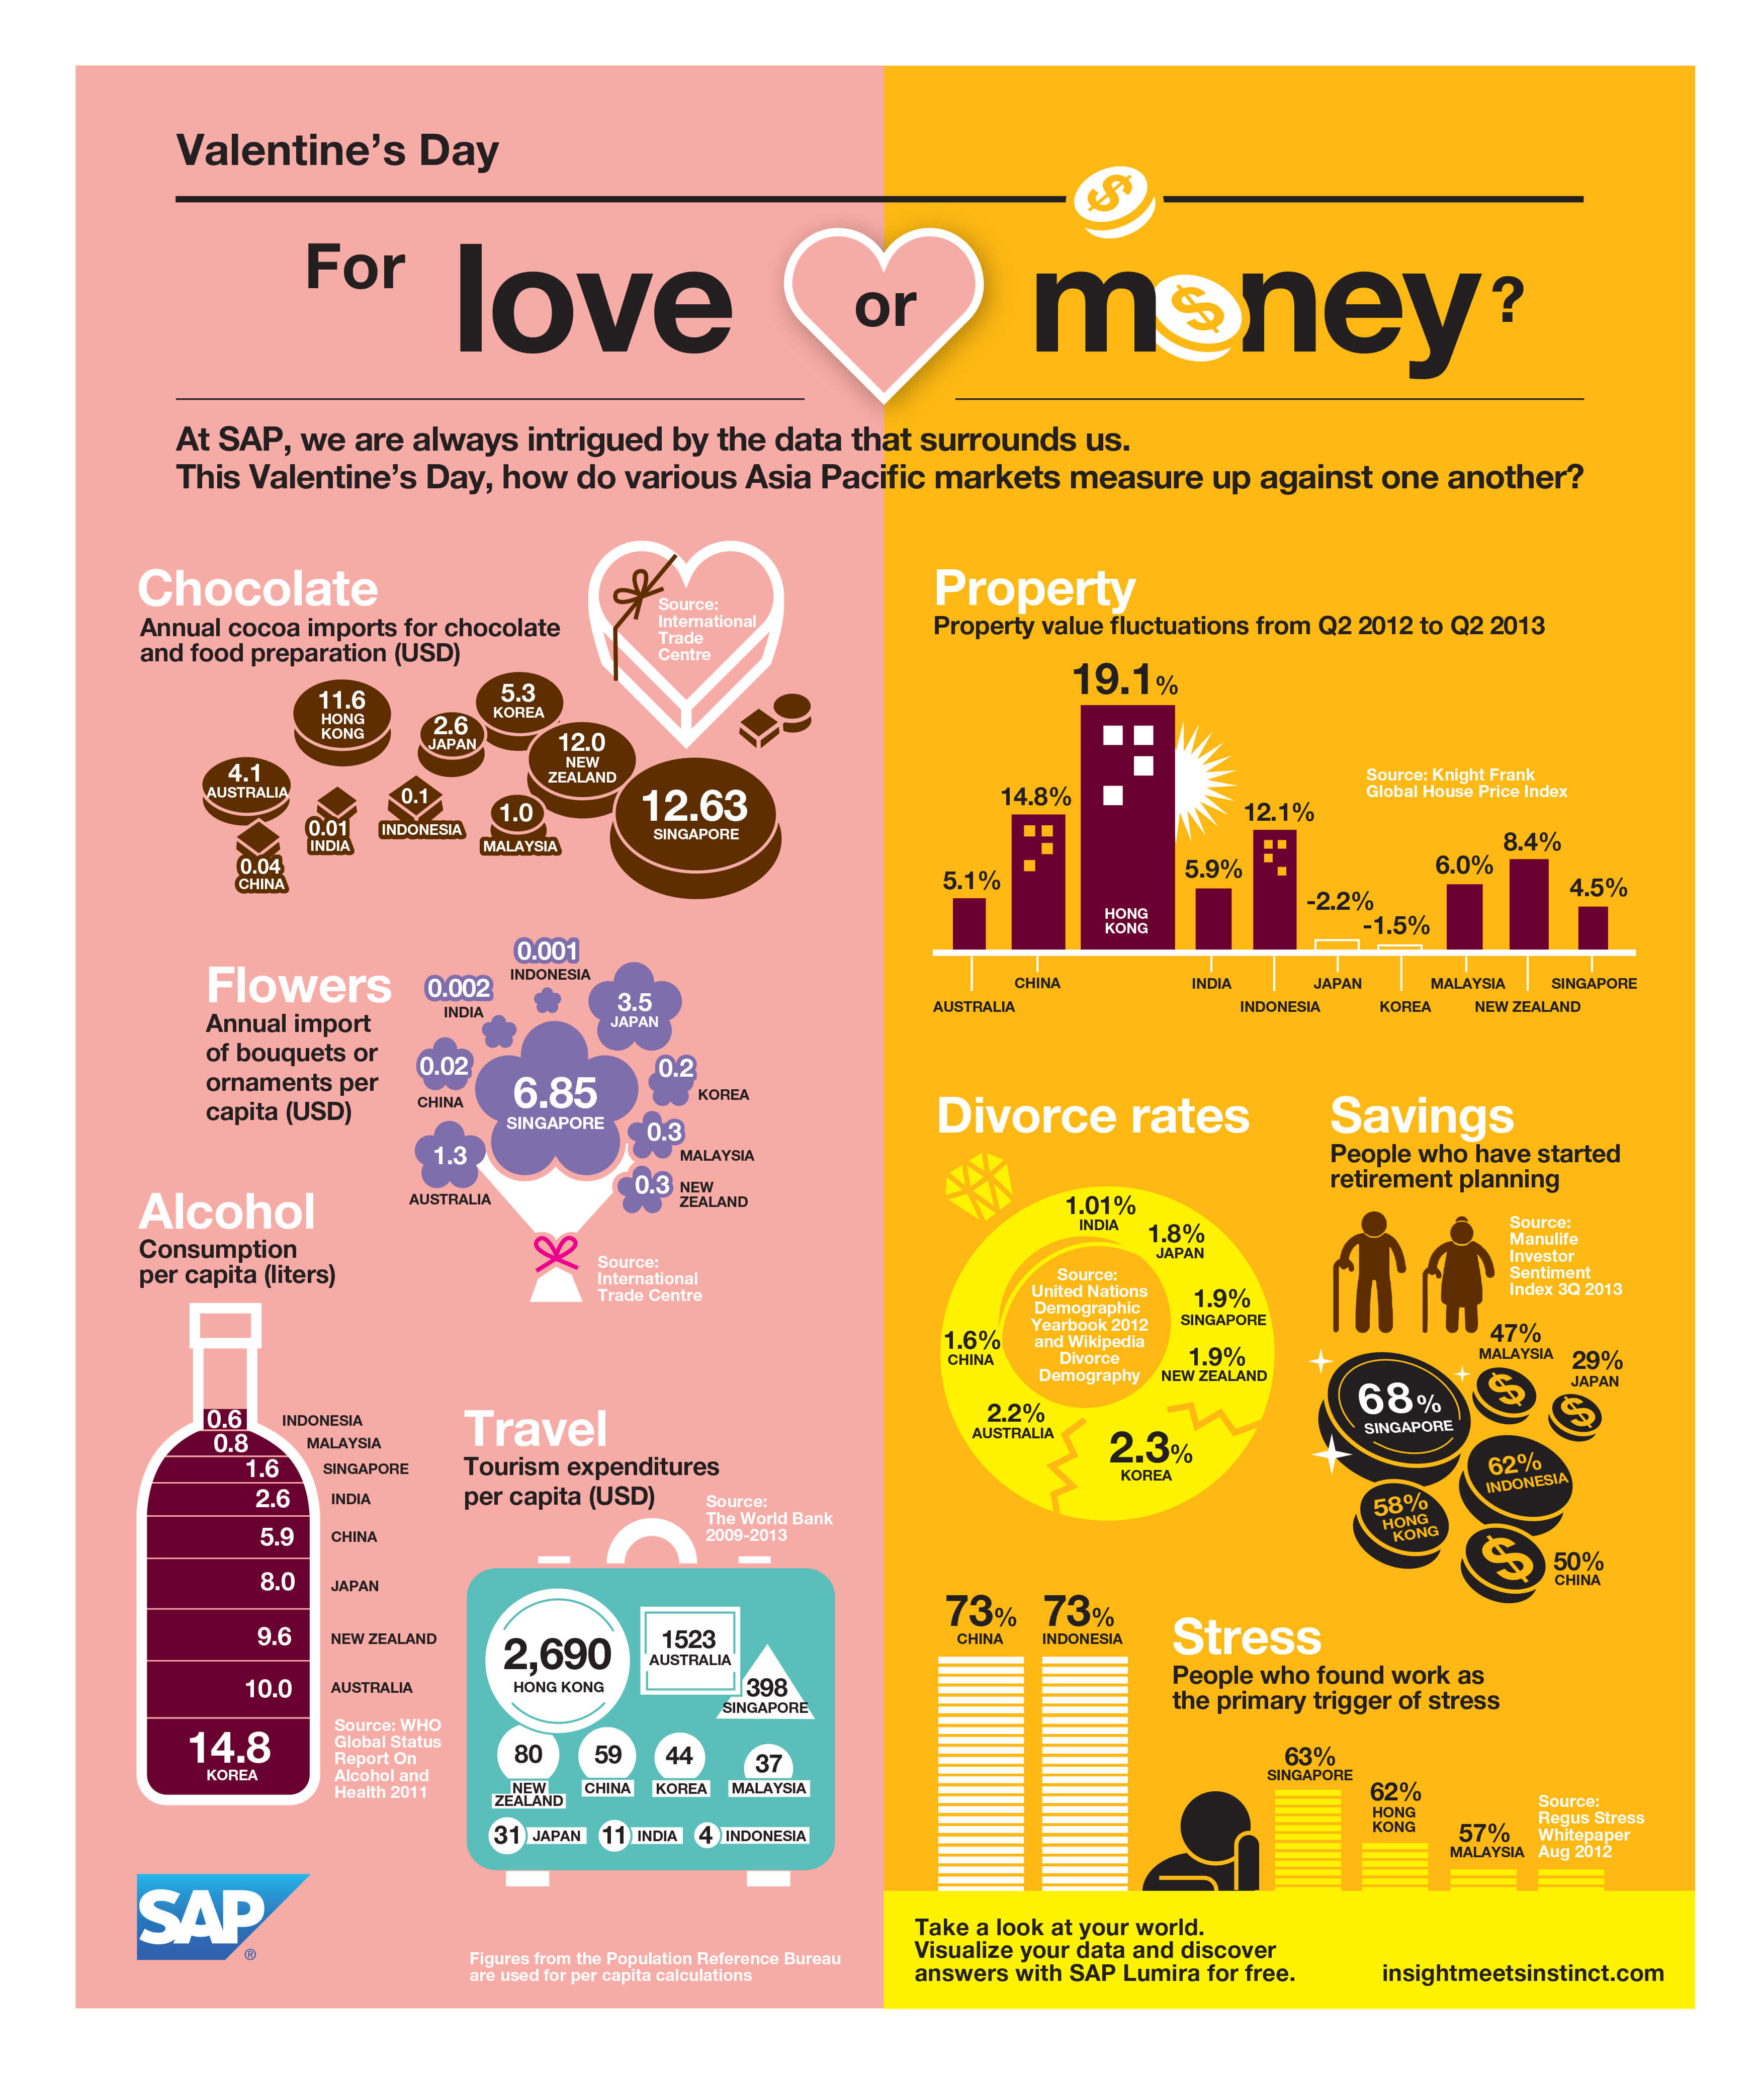 Valentine's Day: For love or money?